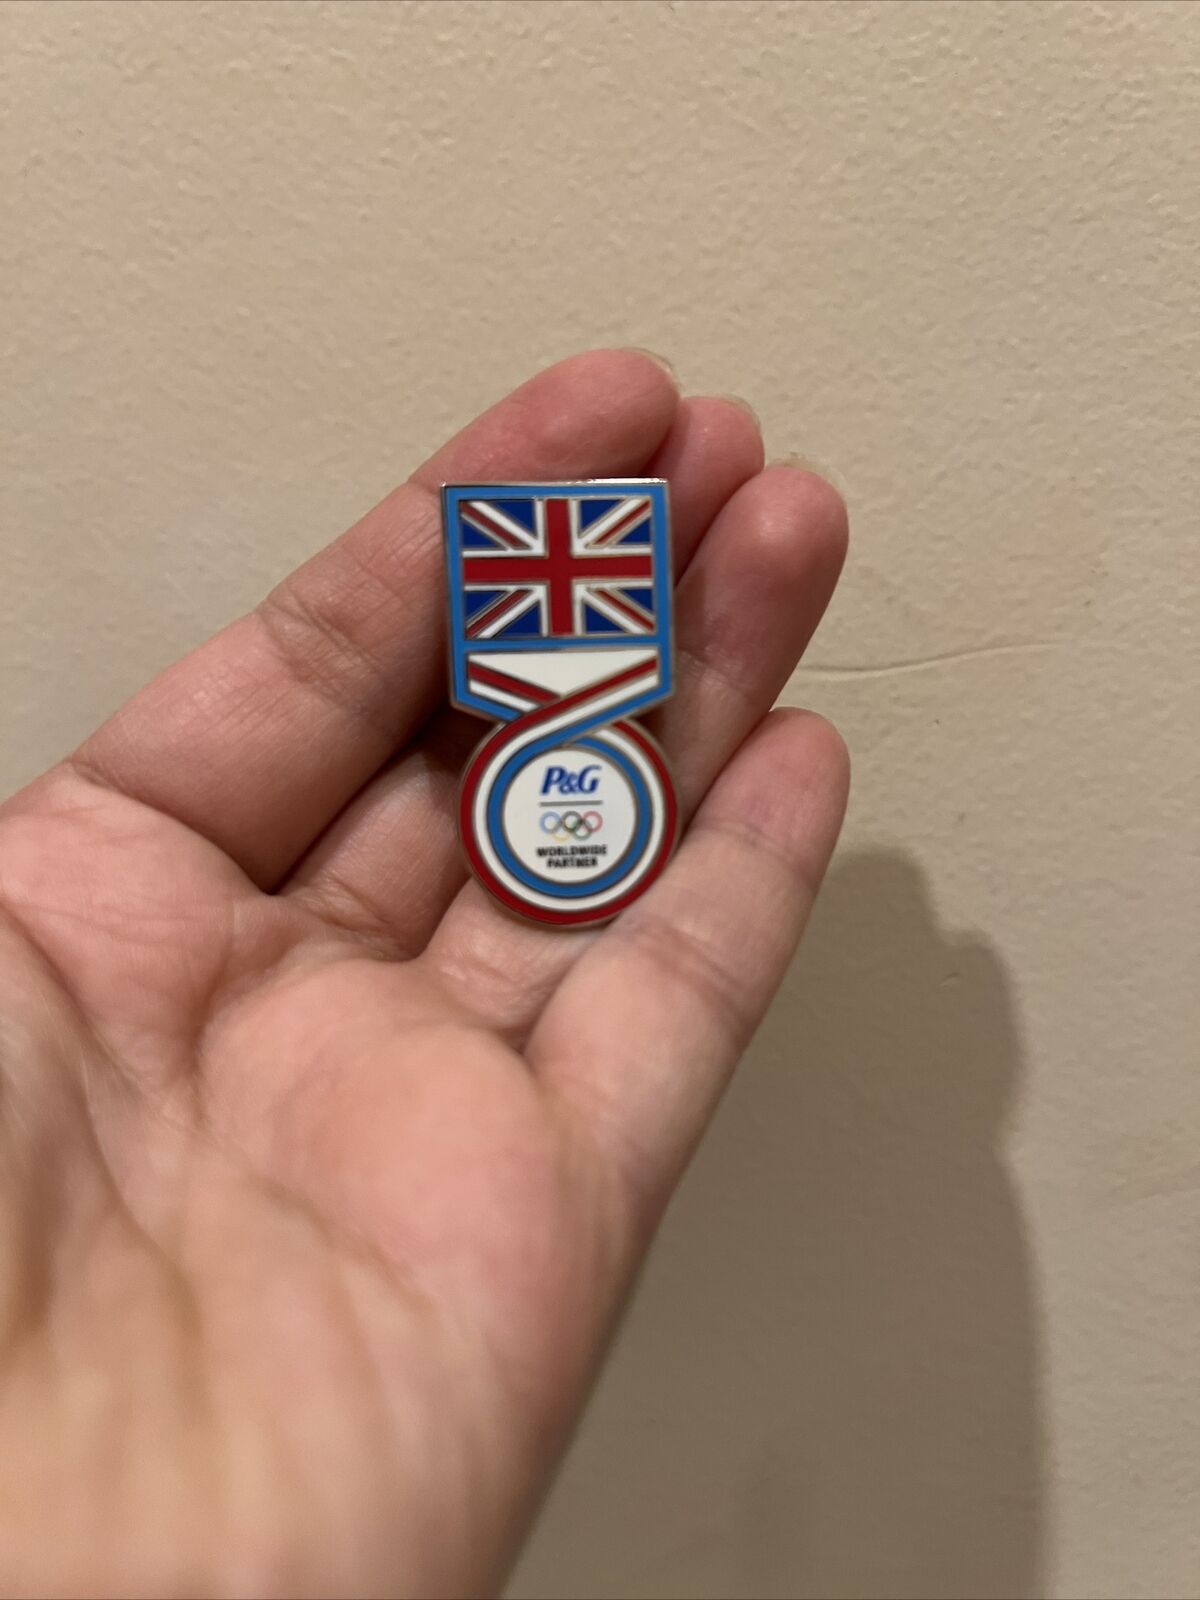 london olympics P&G official pin collectible